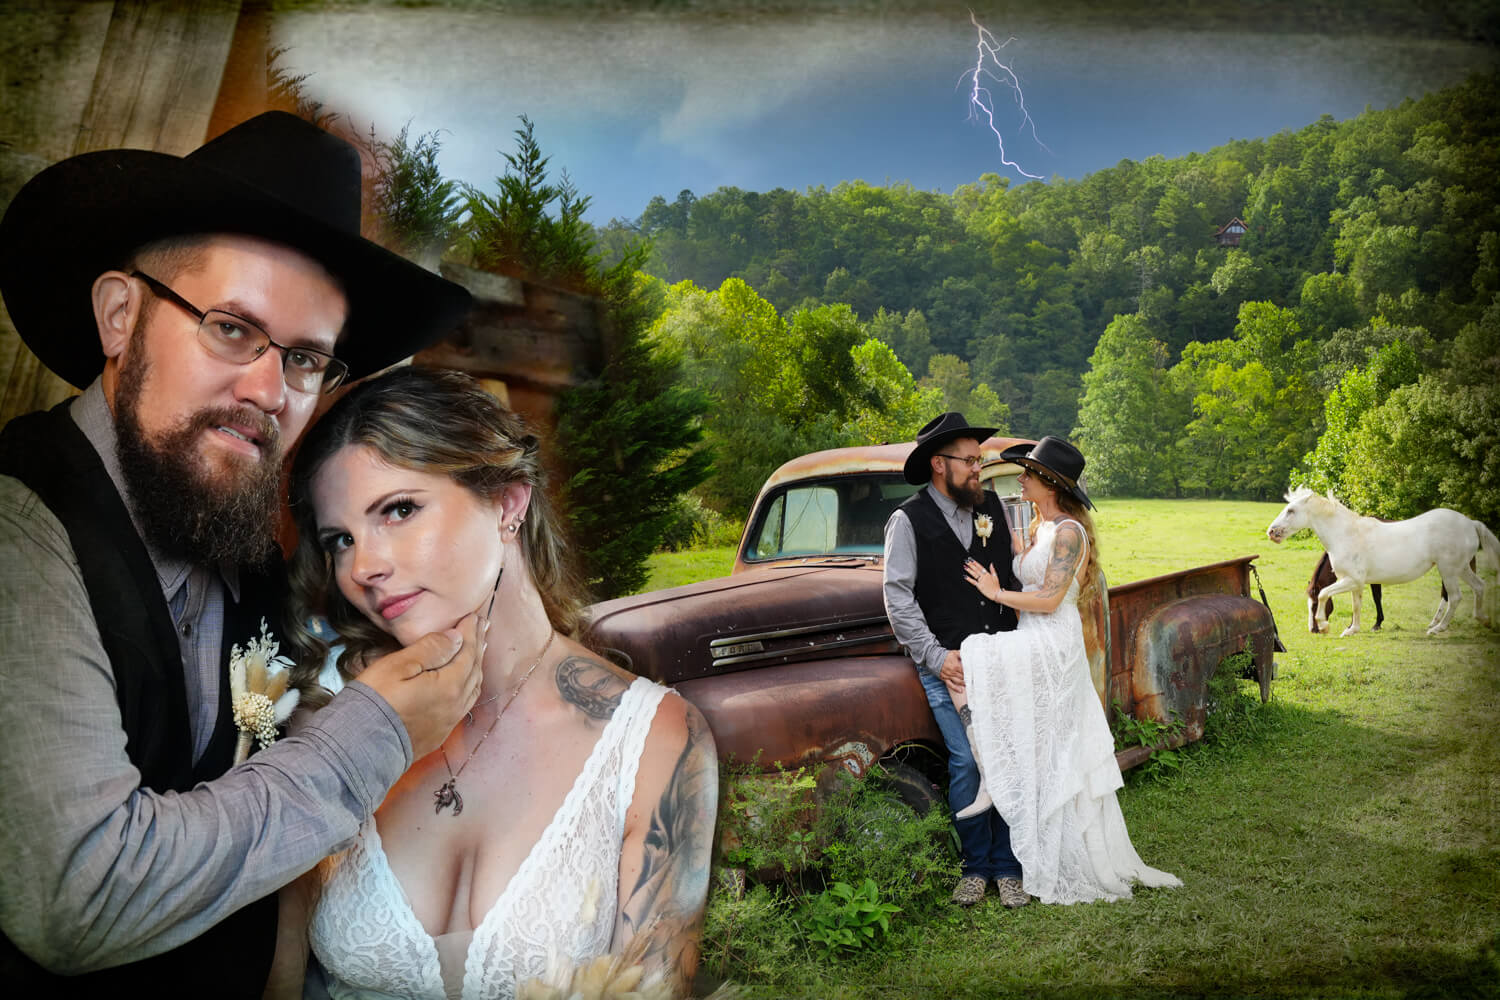 Artistic western collage of couple with black cowboy hats by an old Ford truck in a field with horses and a dark blue sky with lightning on their wedding day